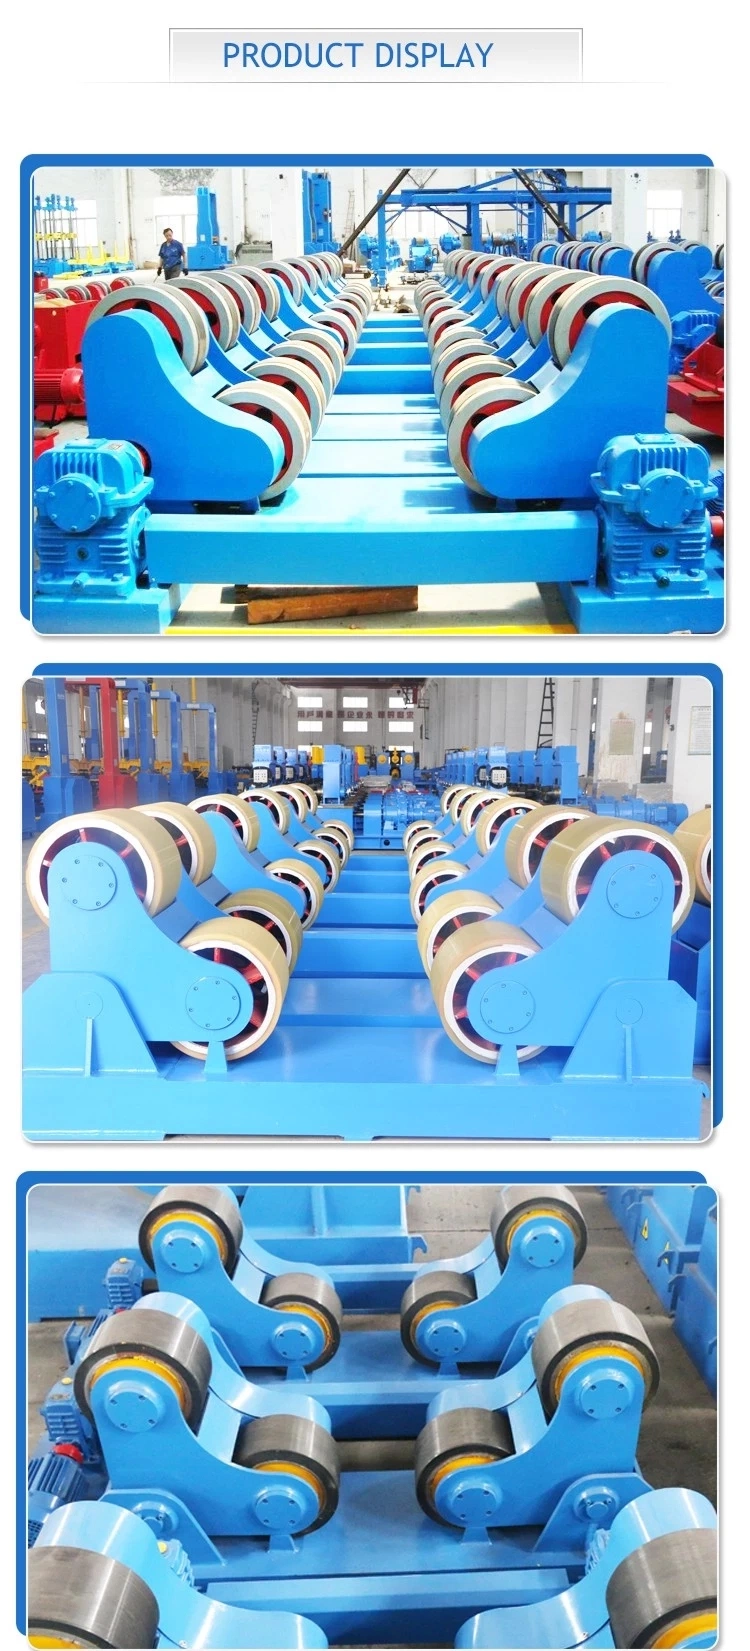 Moveable 60t Welding Rotators Pipe Turning Rolls for Oil Tank Wind Tower